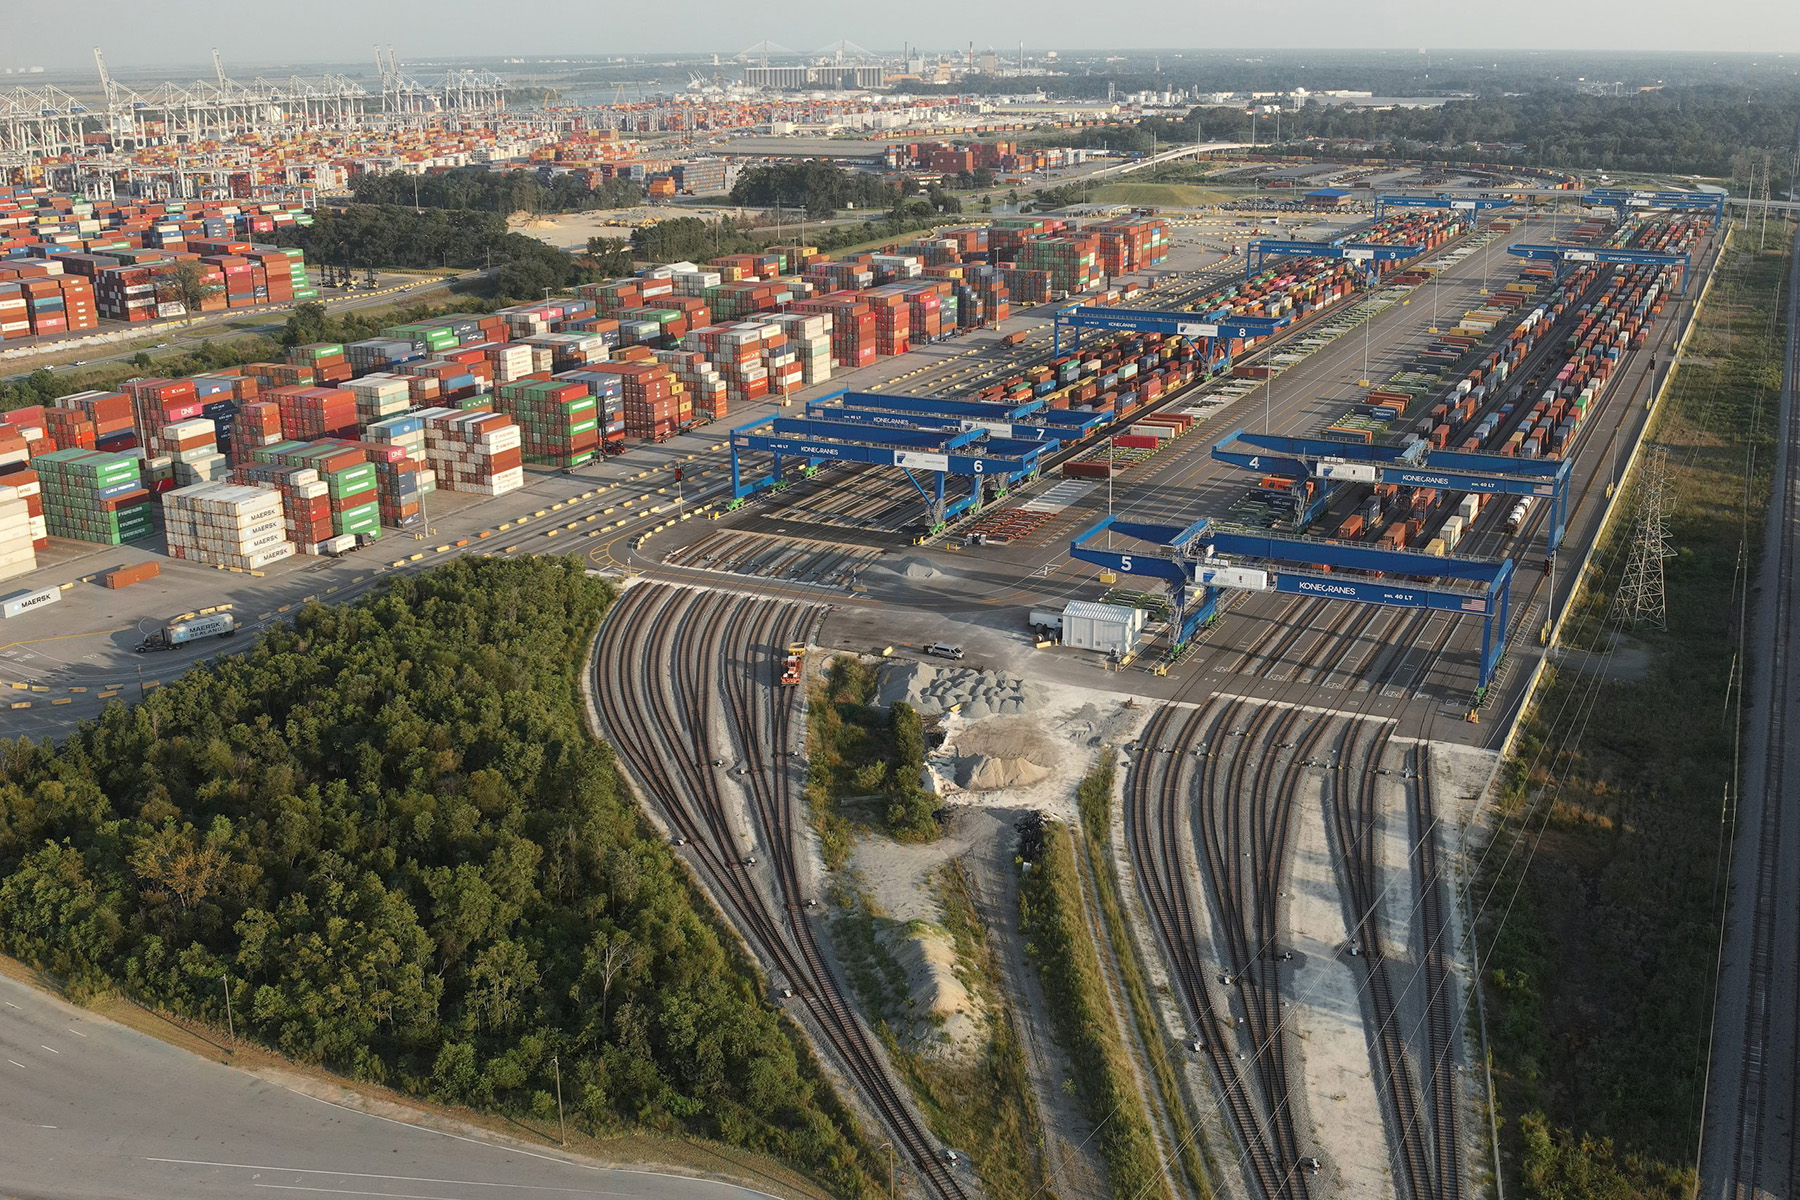 Photo shows a rail yard full of shipping containers.